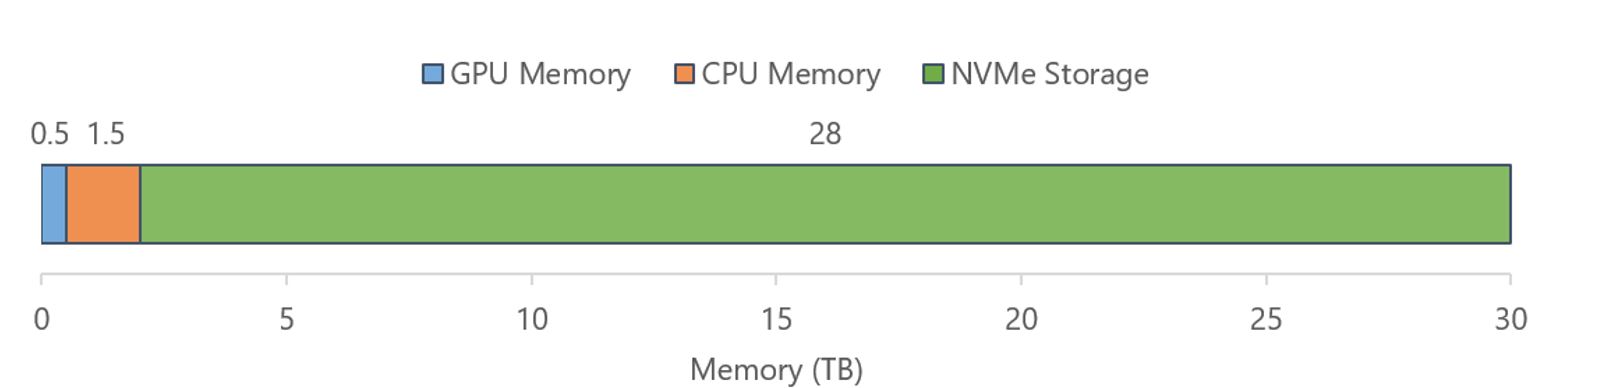 Figure 3: Breakdown of the total memory/storage available on a single NVIDIA DGX-2 system. It has 3x CPU memory and over 50x NVMe storage compared to GPU memory.